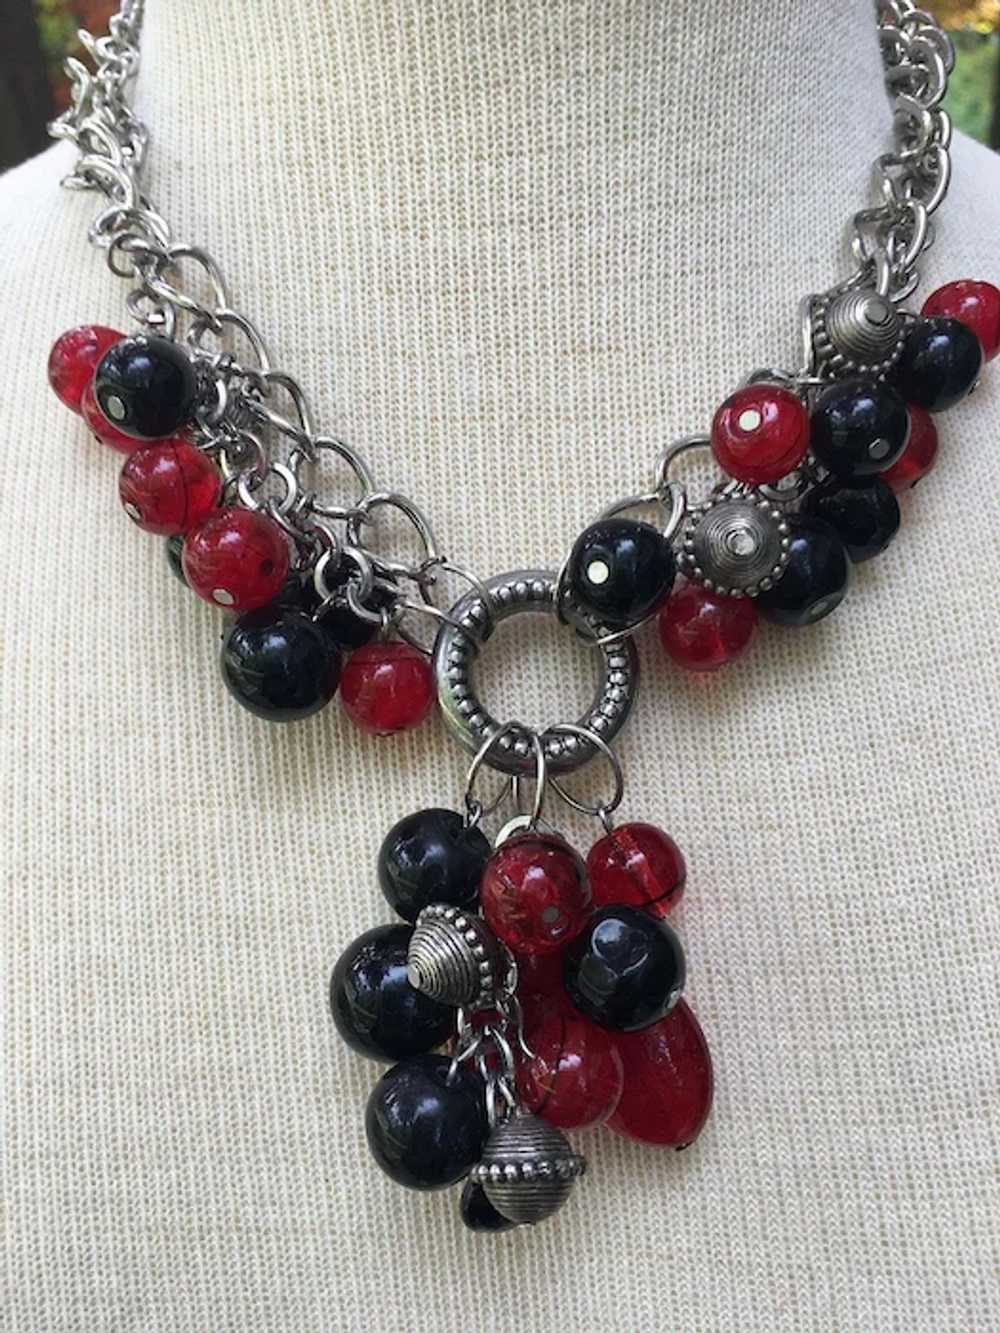 Chunky Red and Black Beaded Silver Tone Necklace - image 2